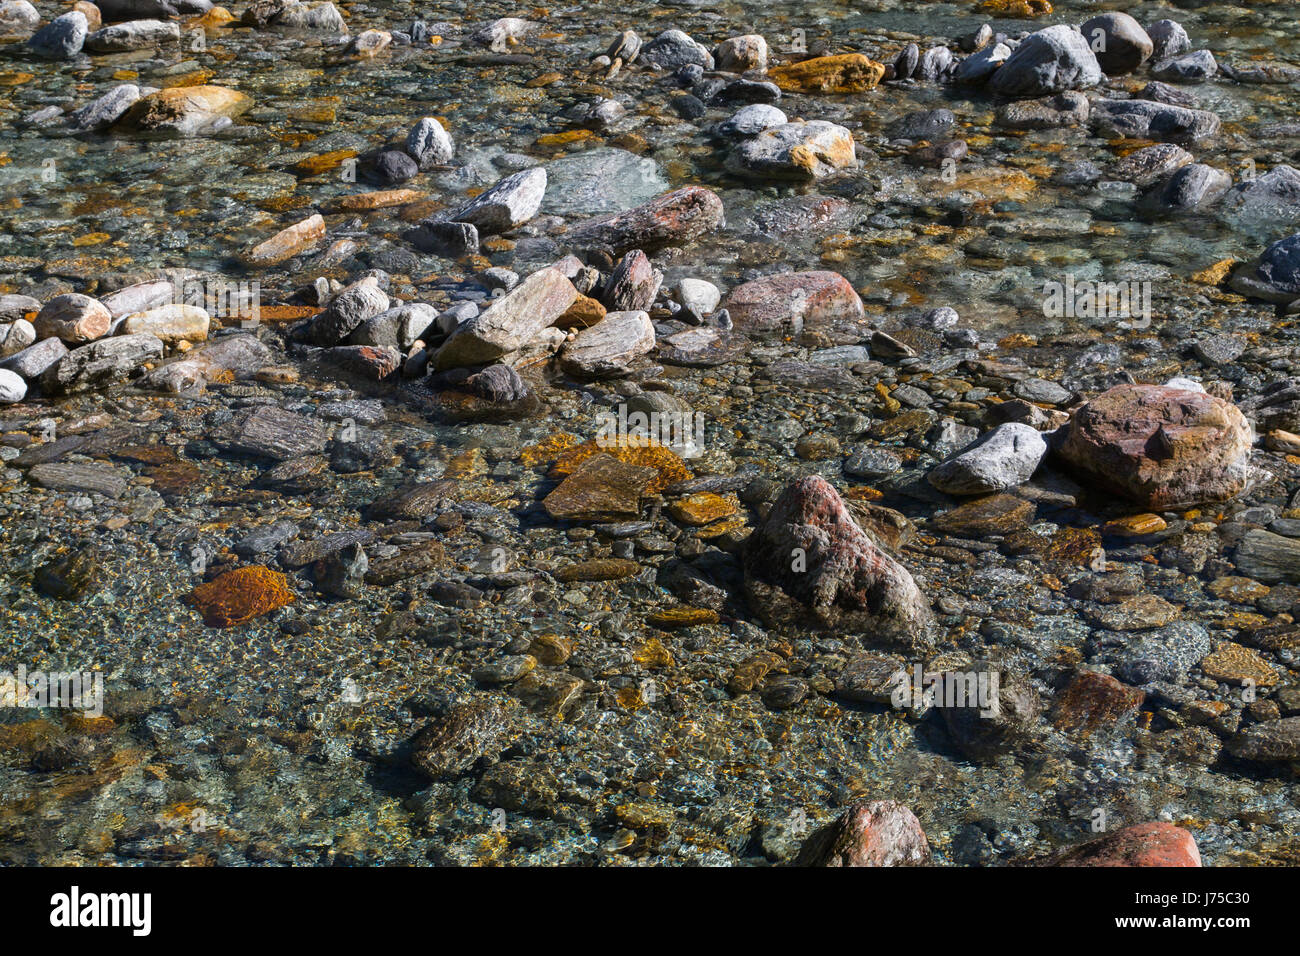 crystal clear water and colorful stones of natural wild river verzasca in switzerland Stock Photo